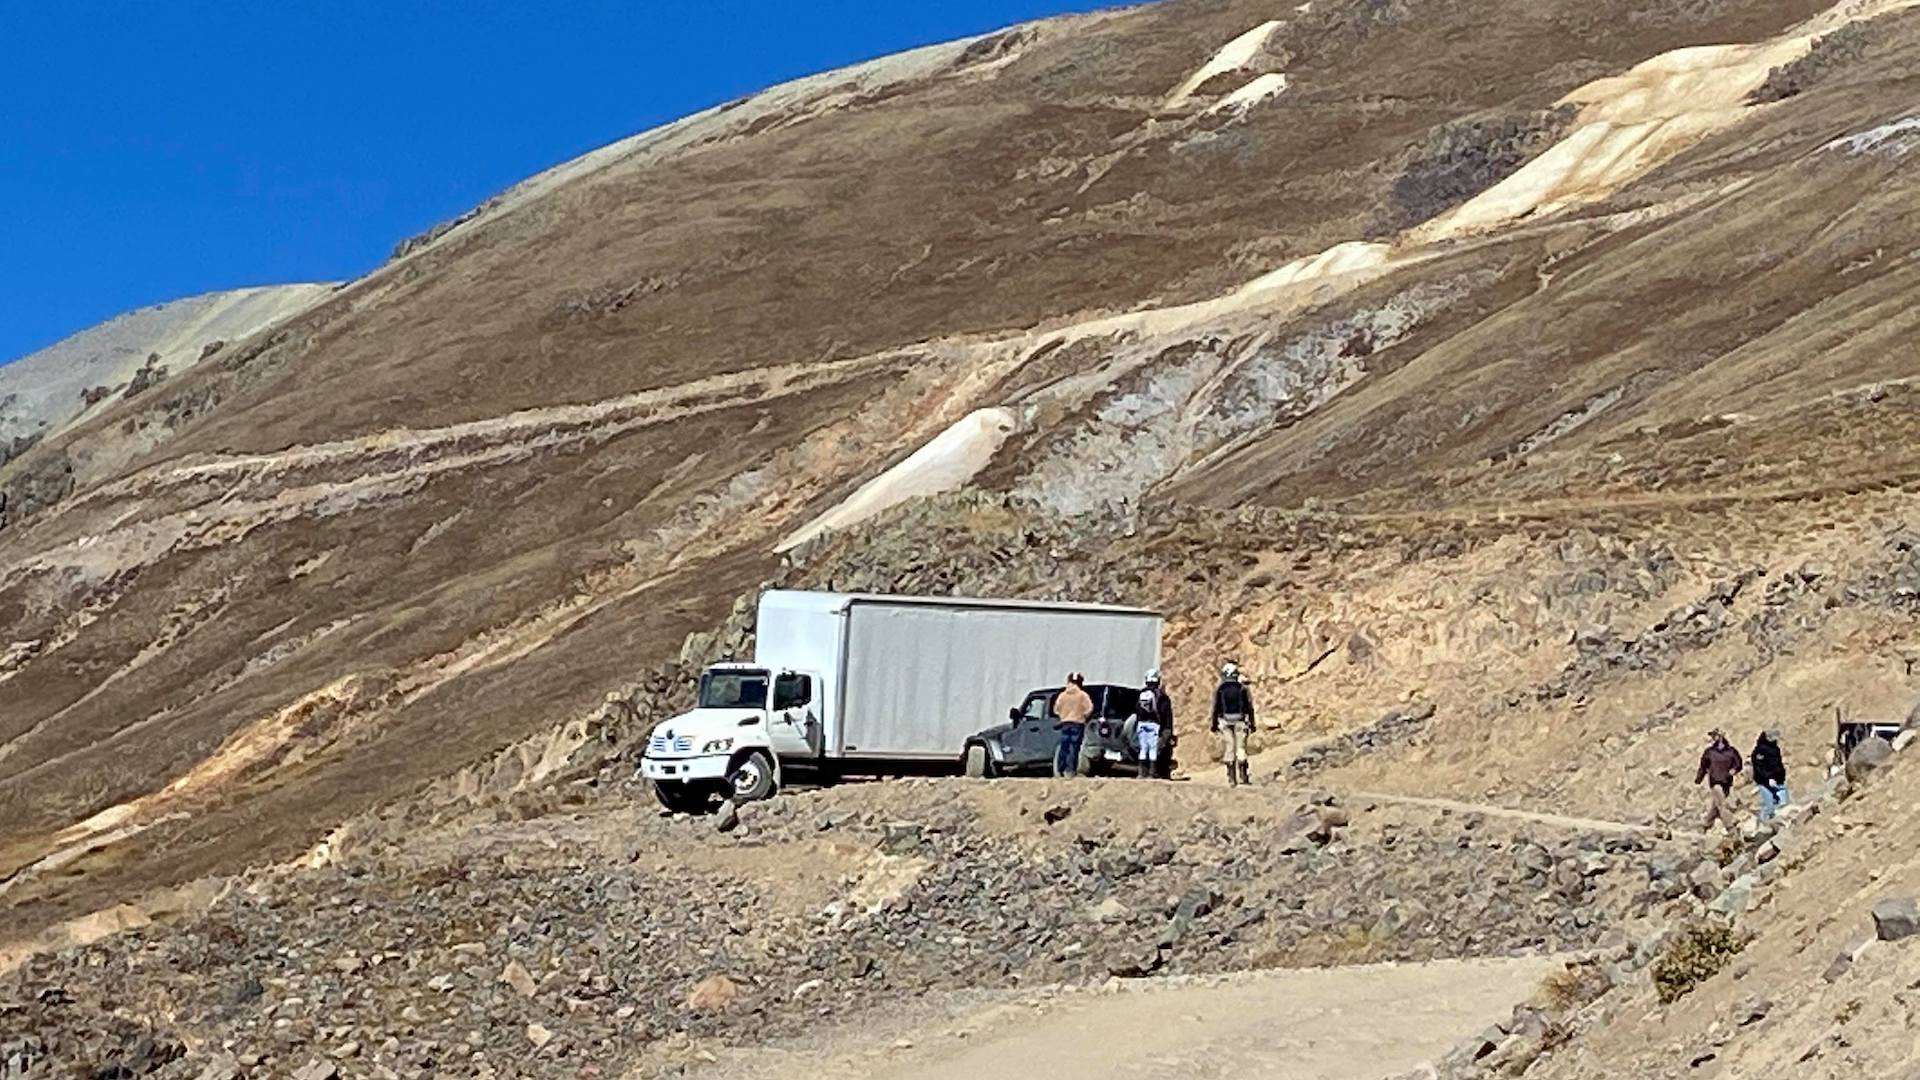 There’s a 30-Foot Delivery Truck Blocking a 4WD Trail High in the Rocky Mountains